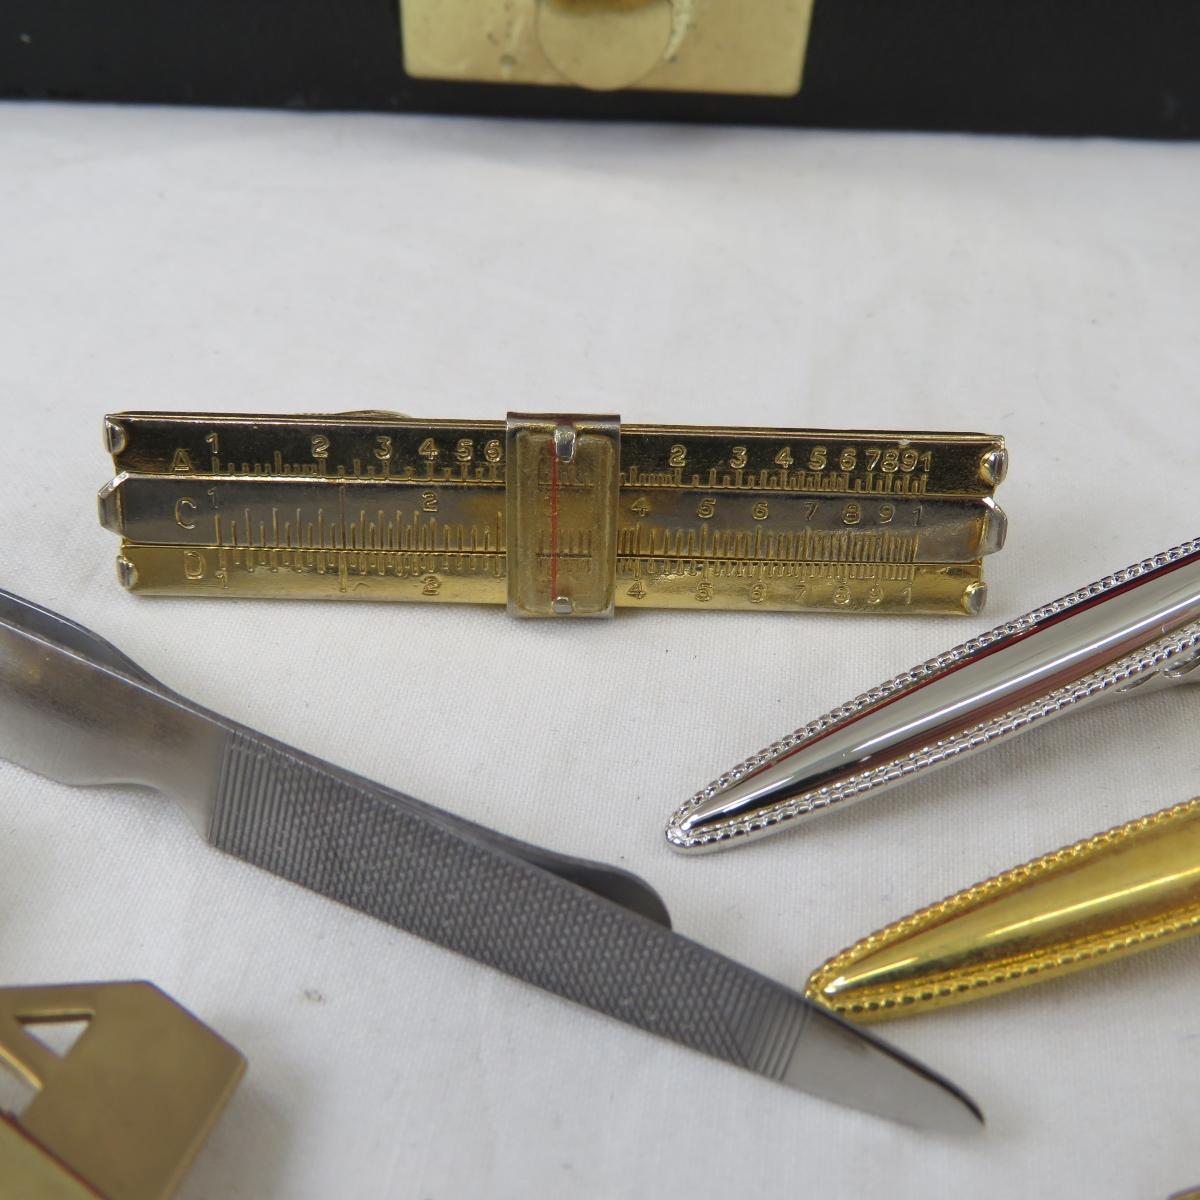 Rings, Cufflinks, Tie Pins and Bars & More in Case